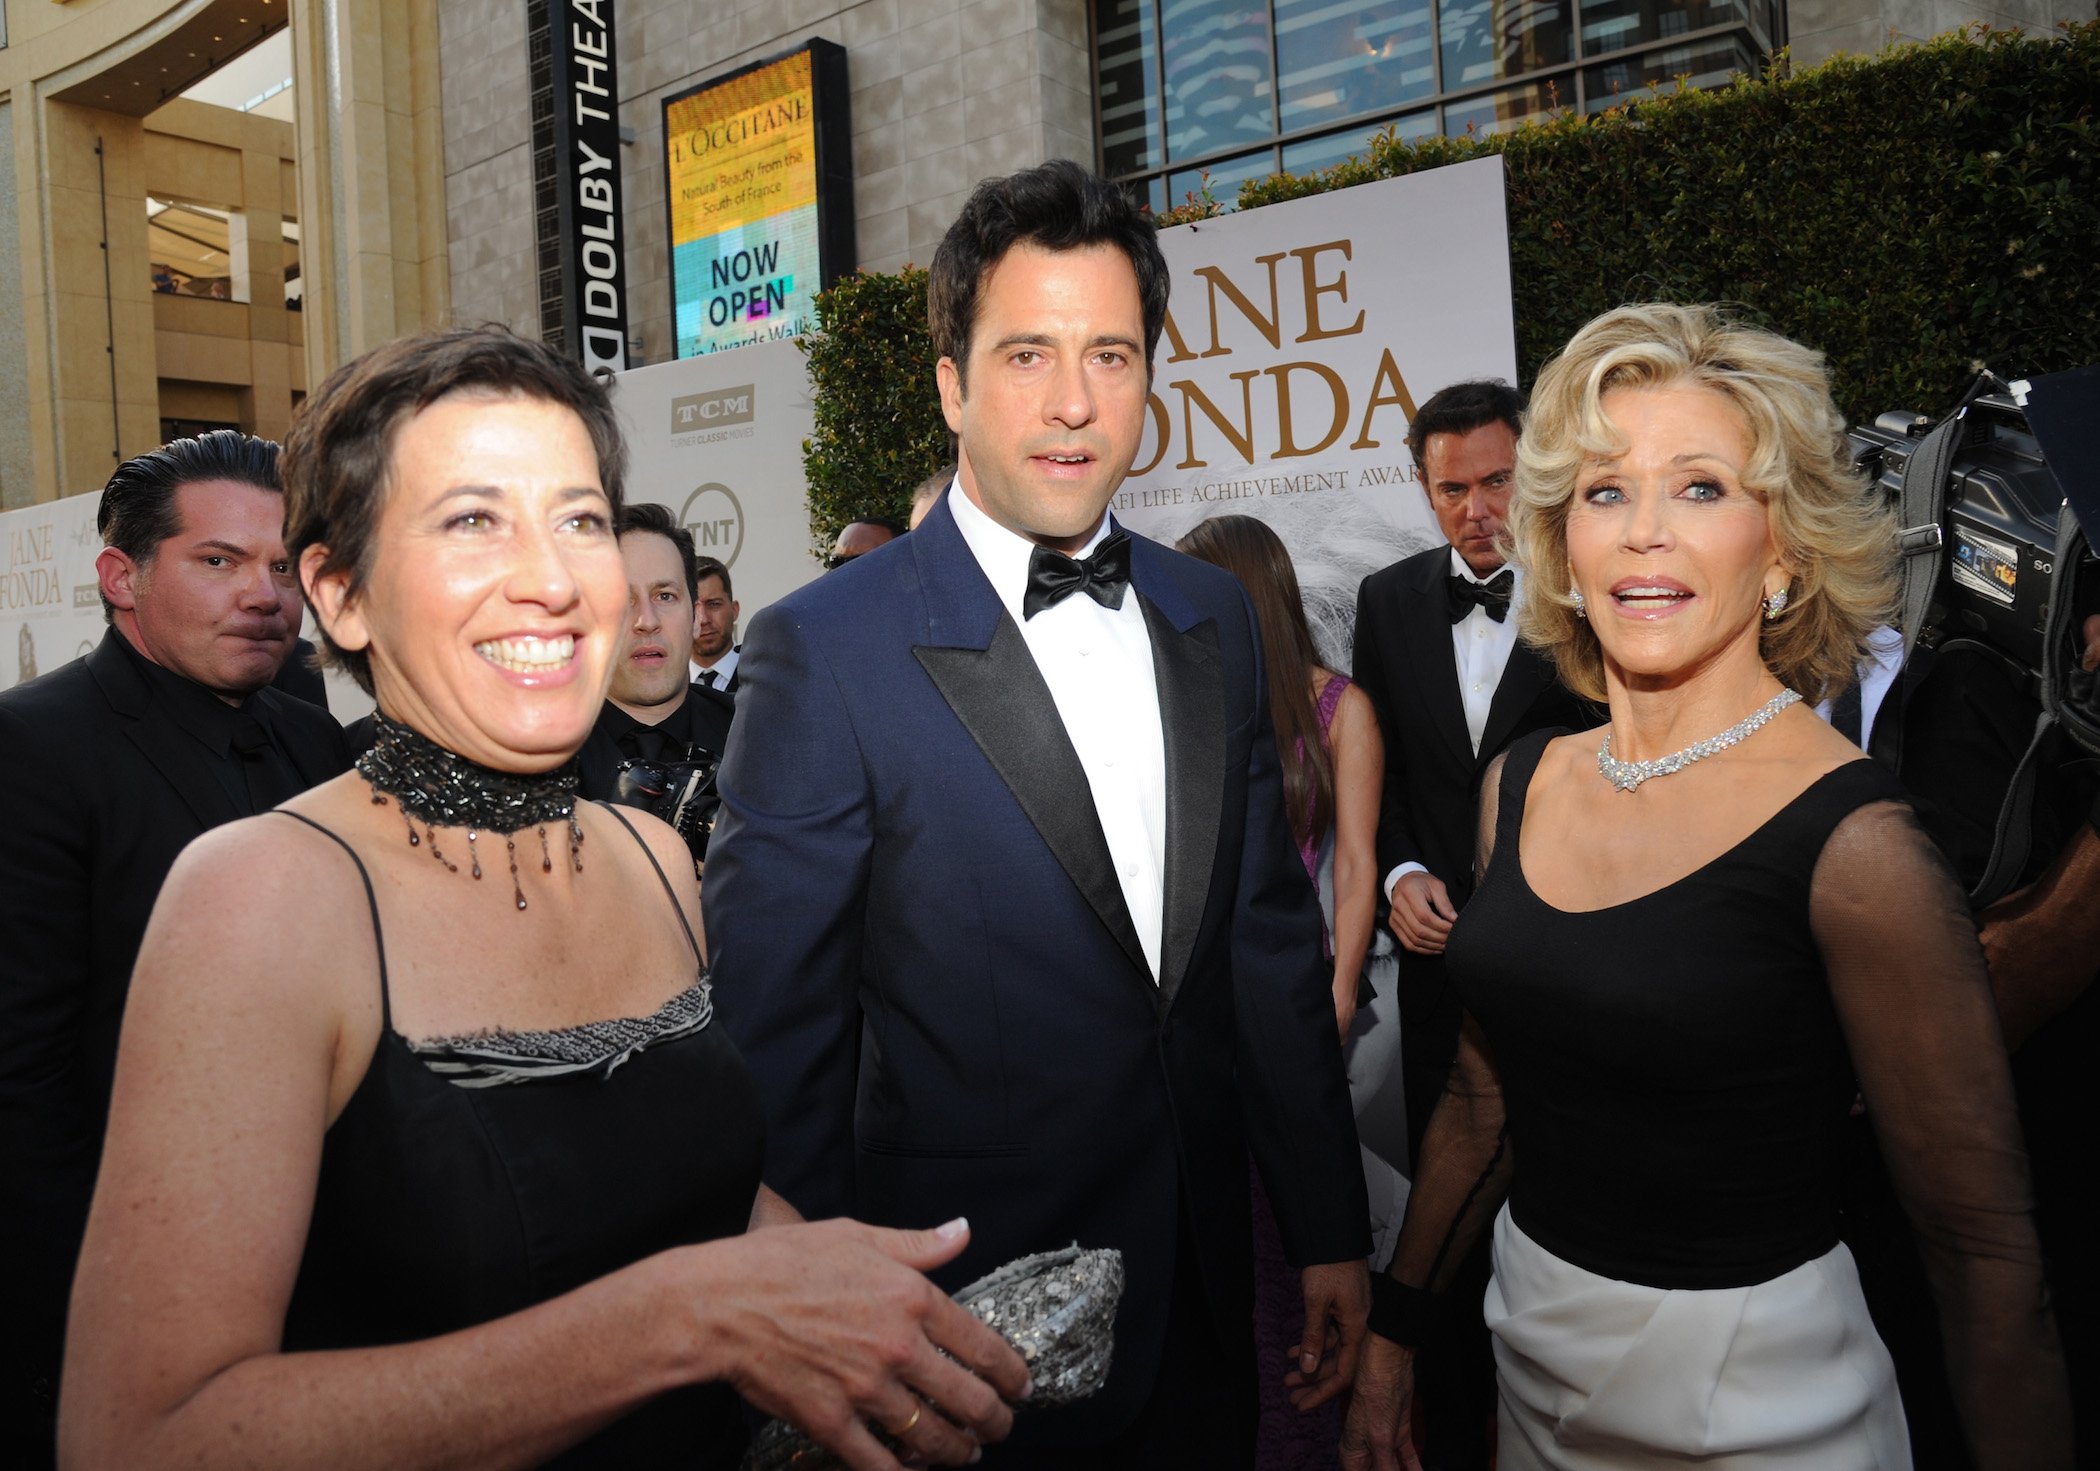 Jane Fonda's children with their mom on the red carpet